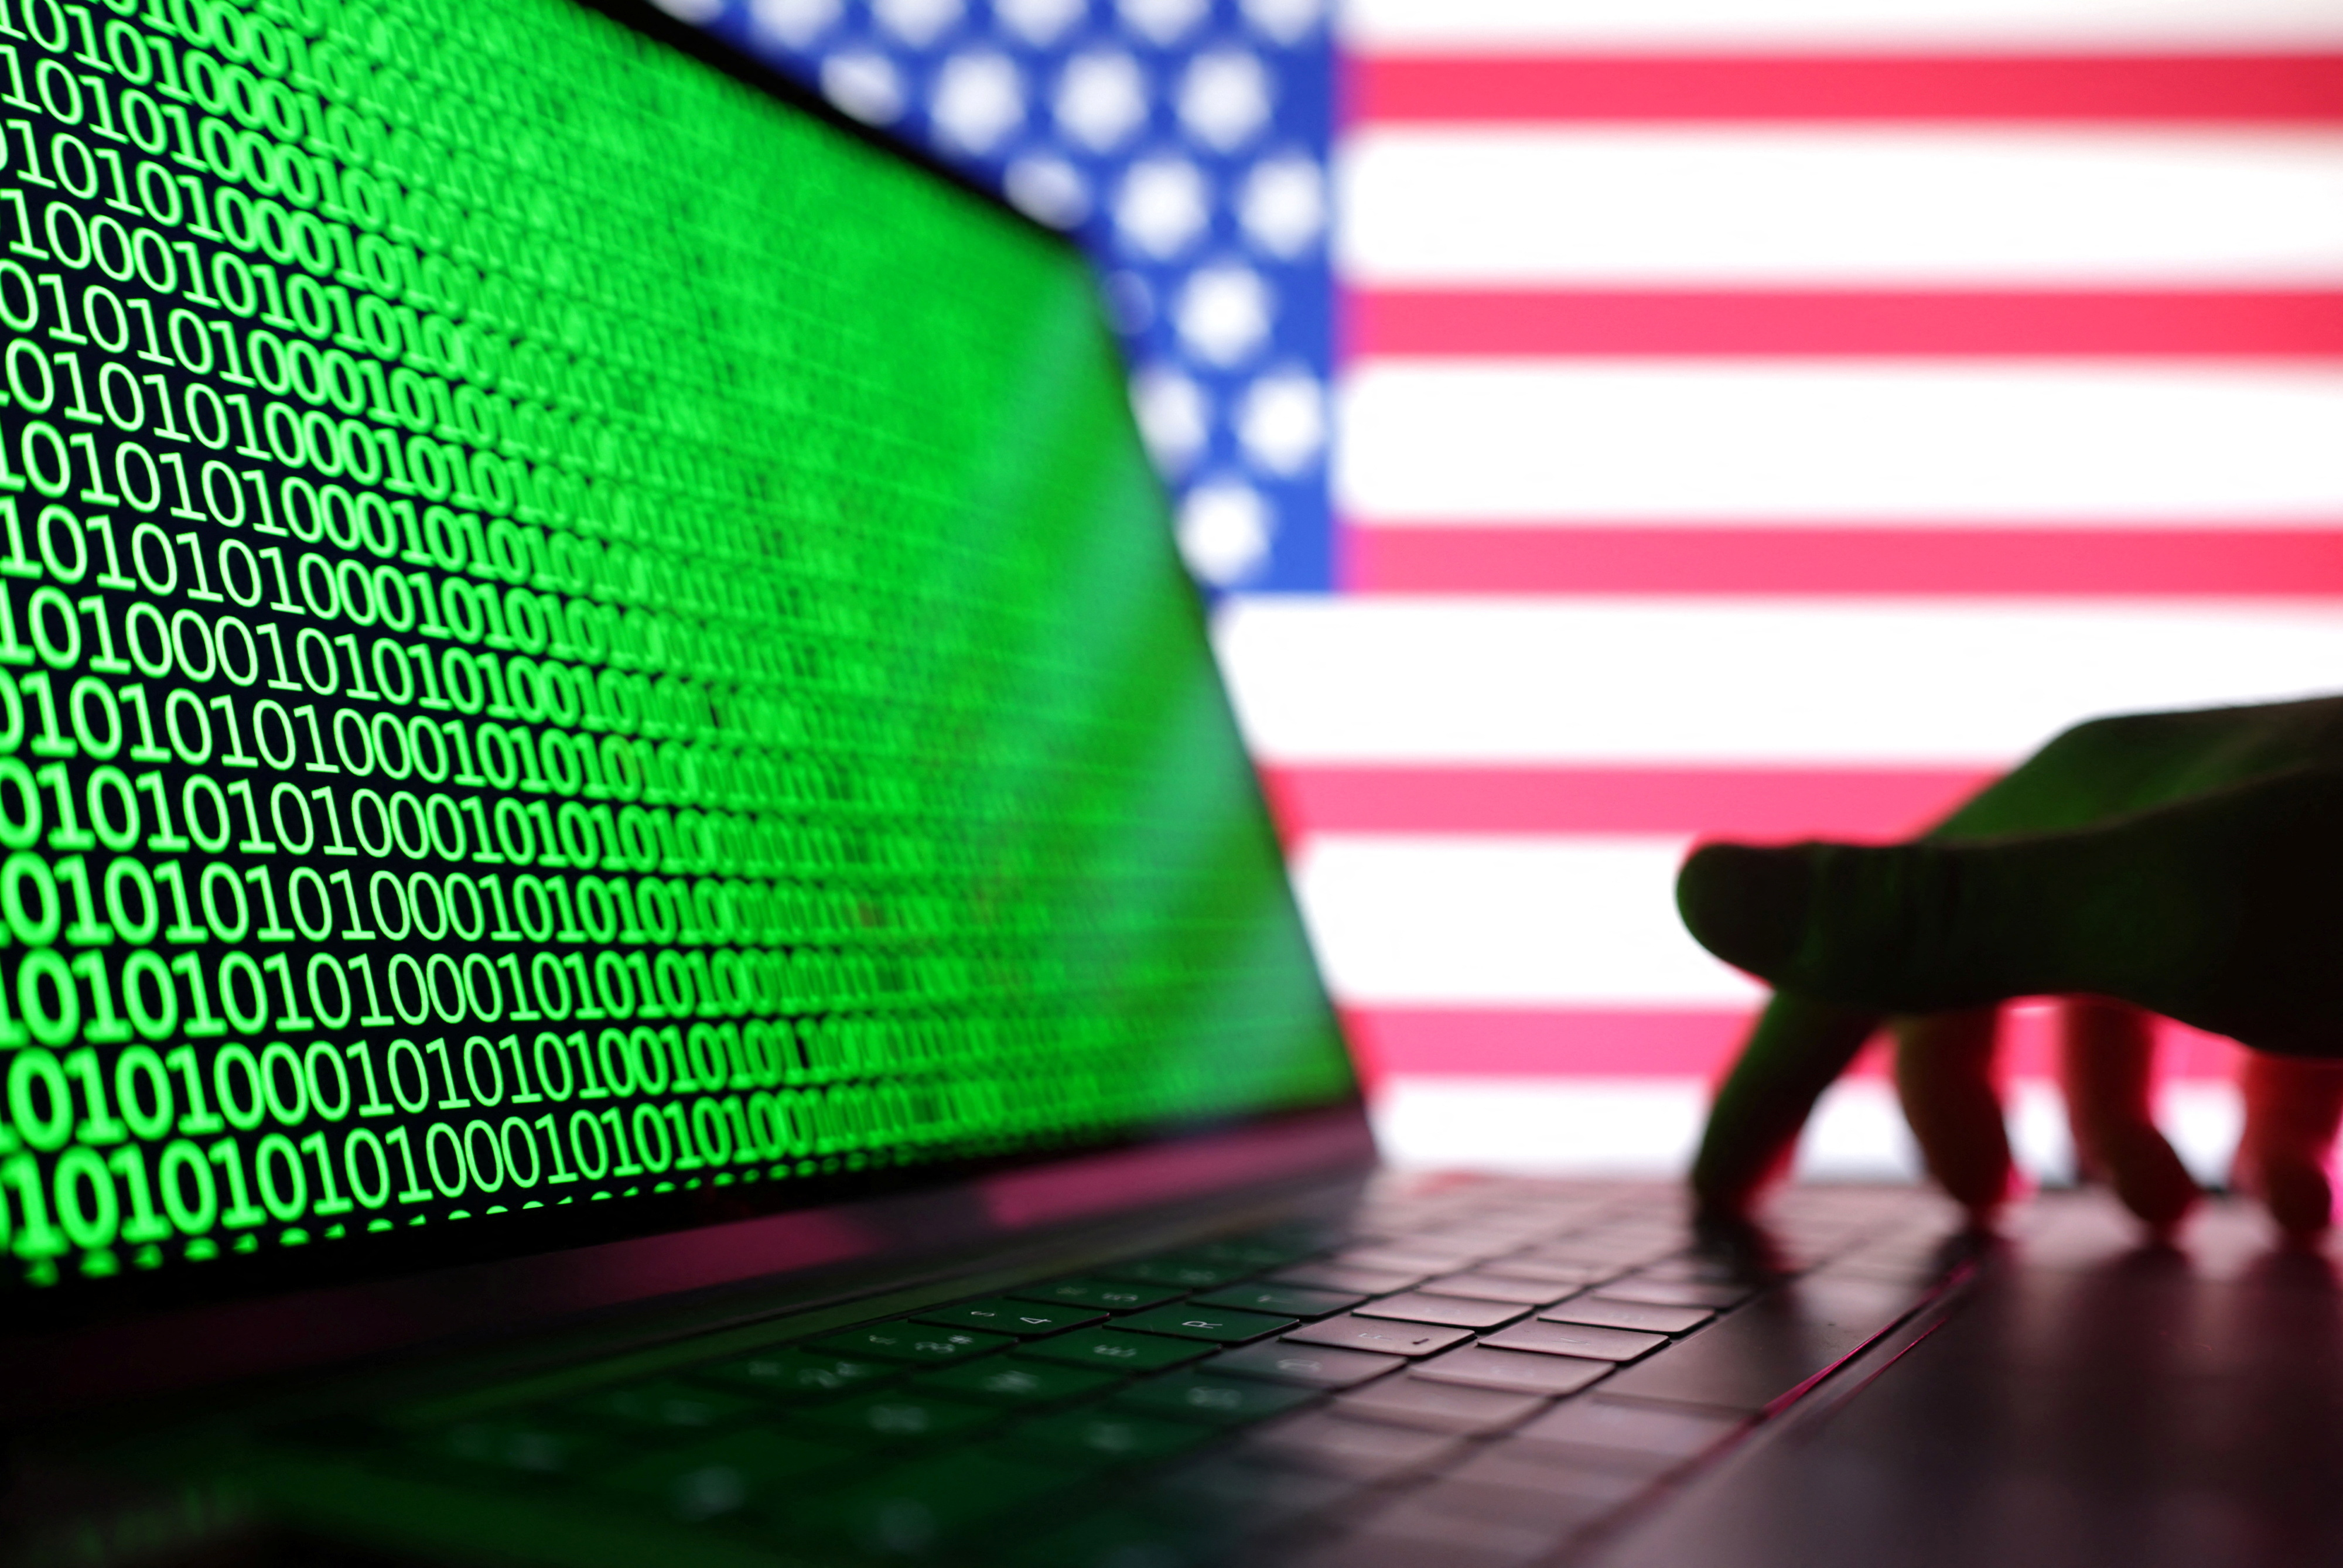 Illustration shows a laptop with binary codes displayed in front of the USA flag